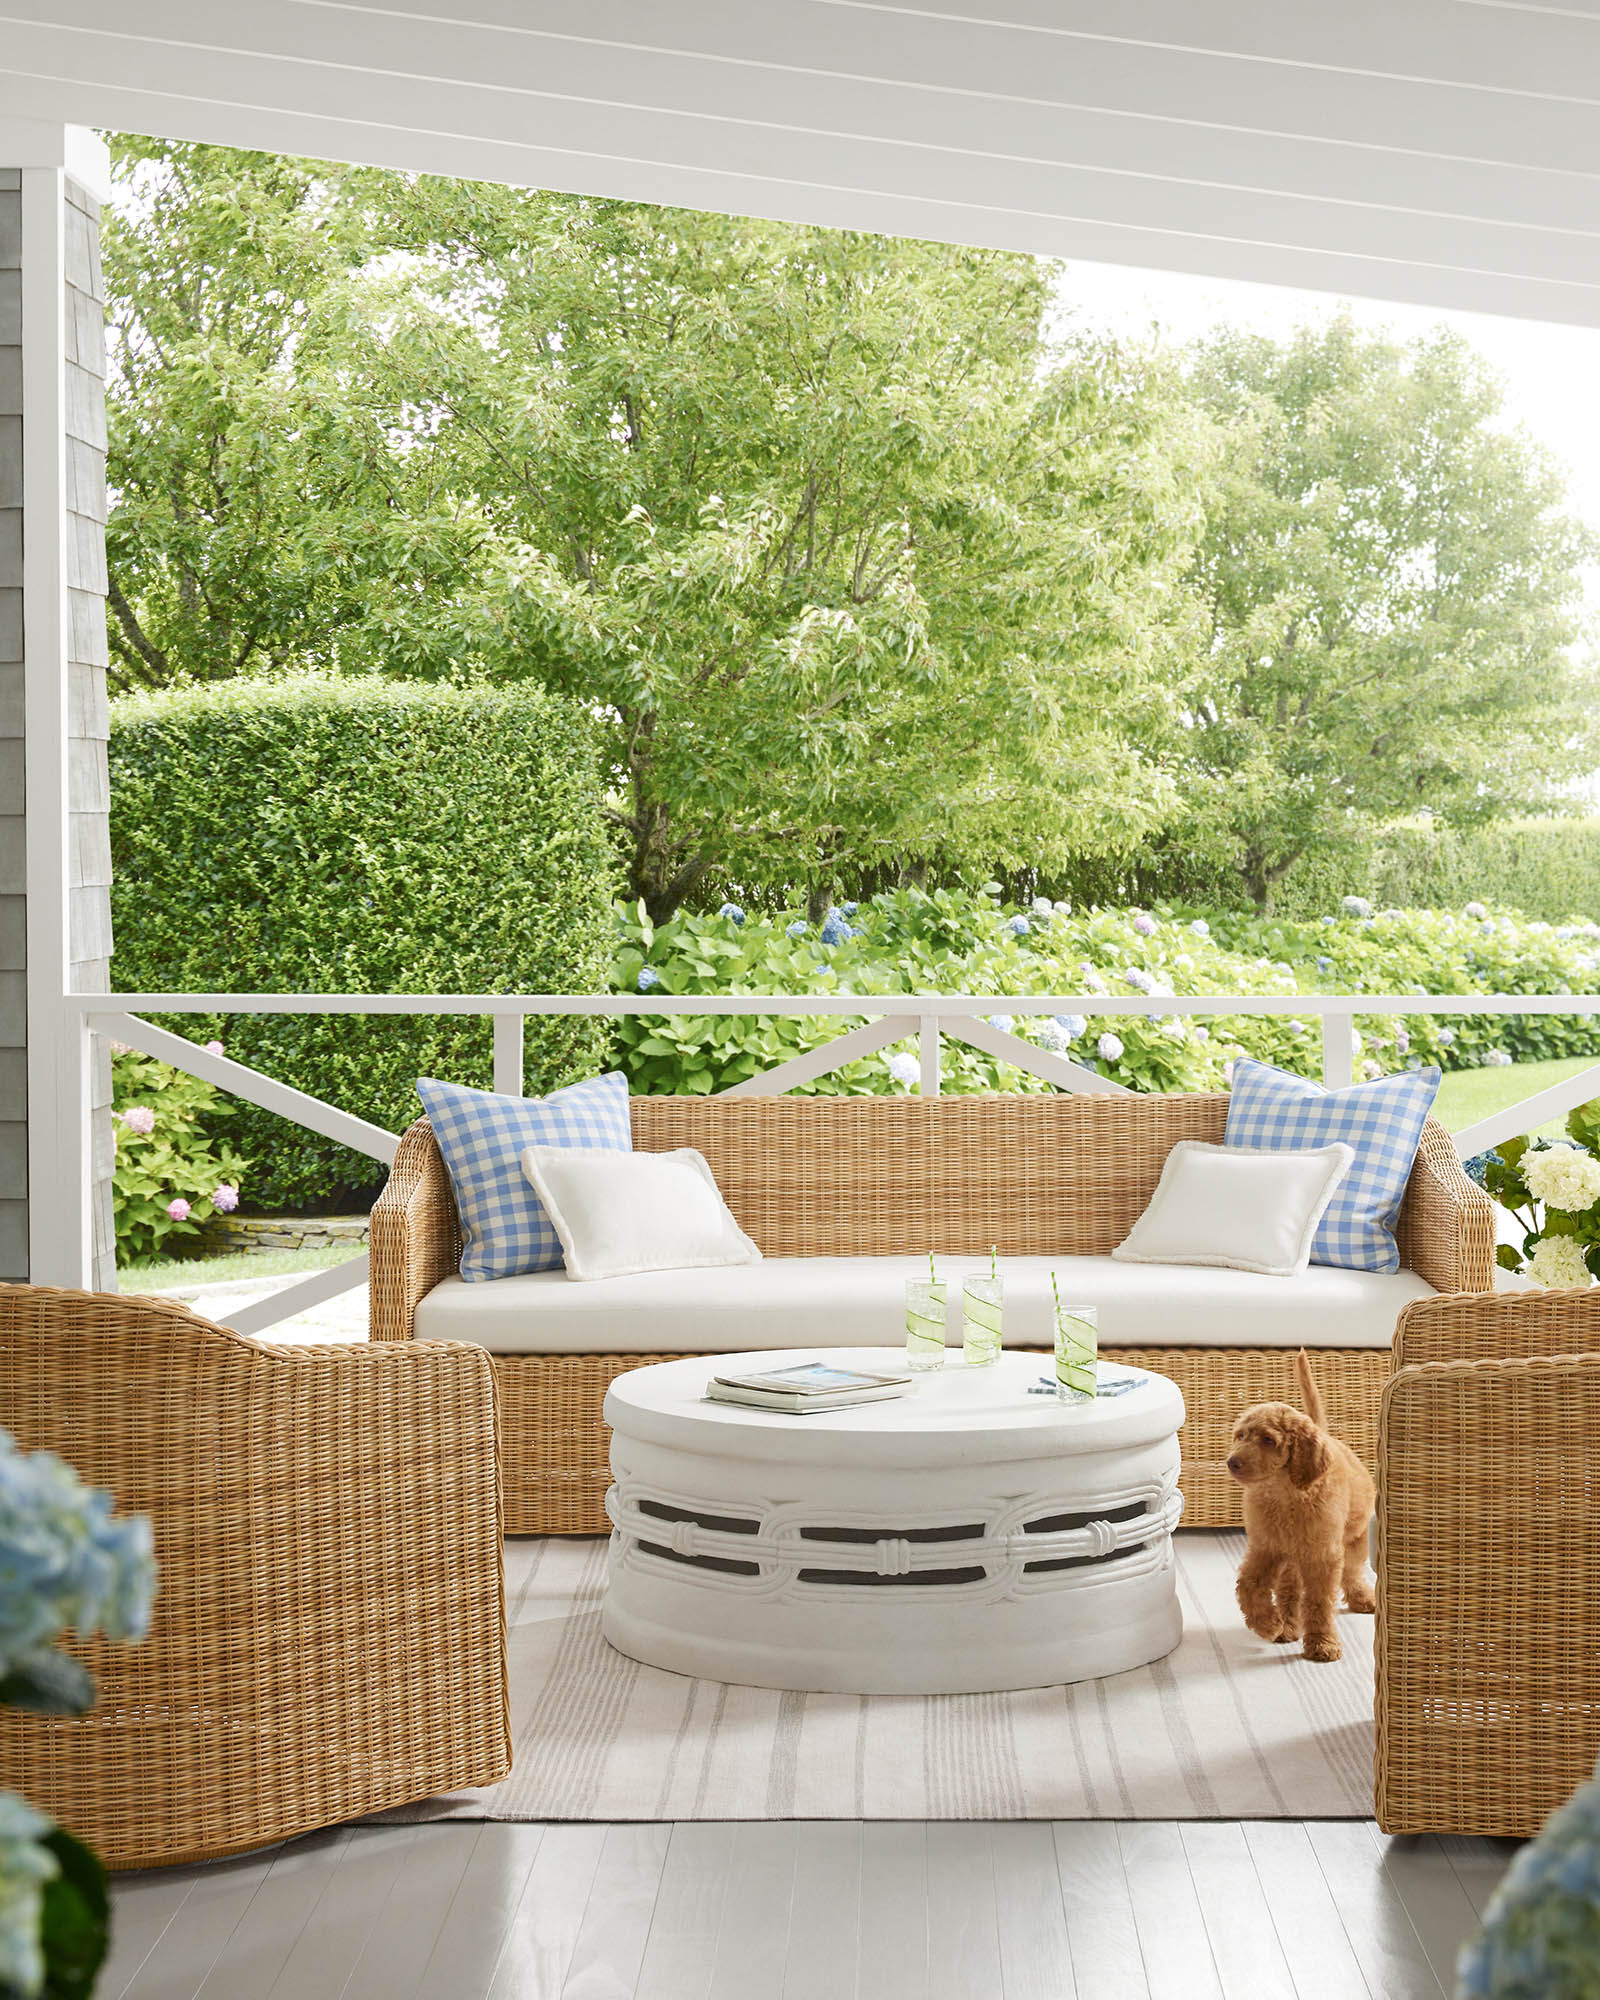 fashionable Outdoor Living room - Serena & Lily - wicker - wicker furniture - outdoor - porch - covered porch - outdoor rug